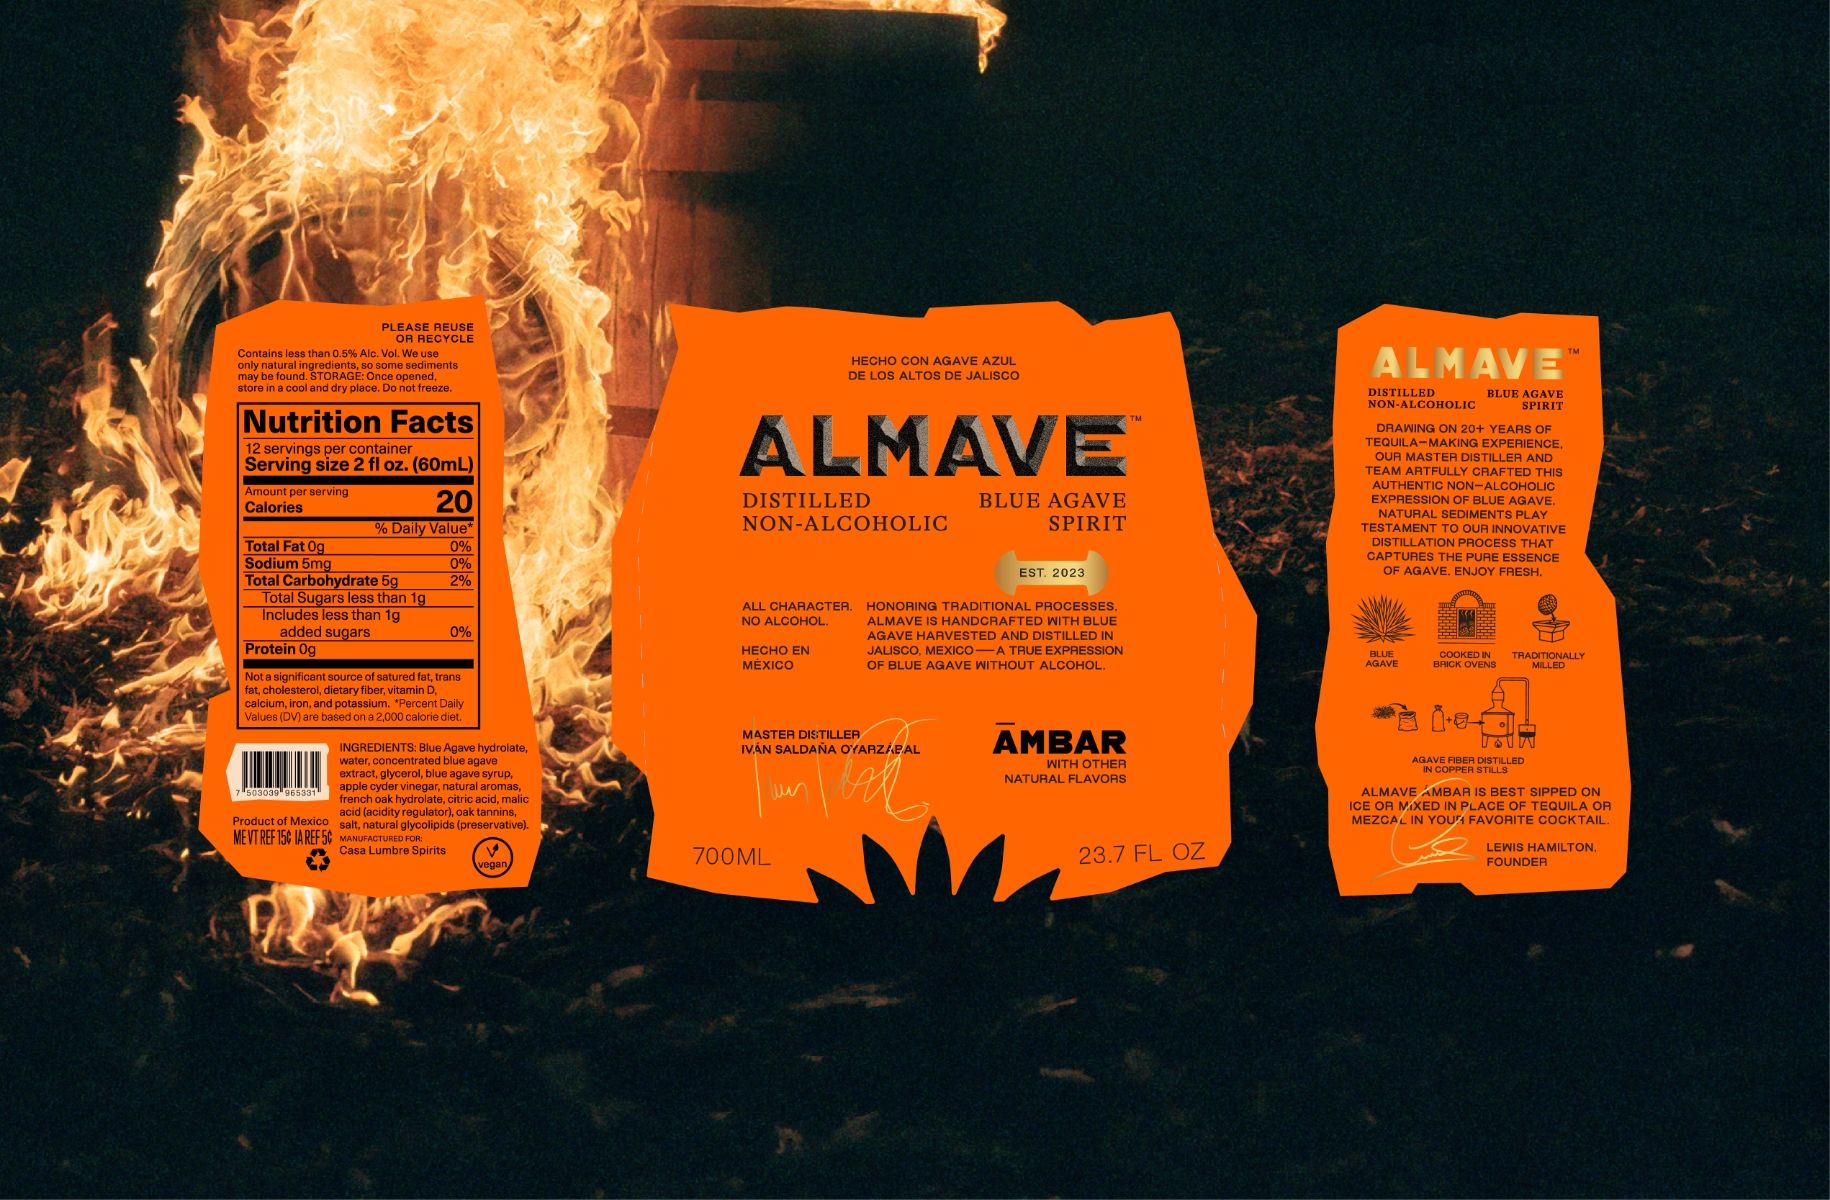 Almave labels in front of flames